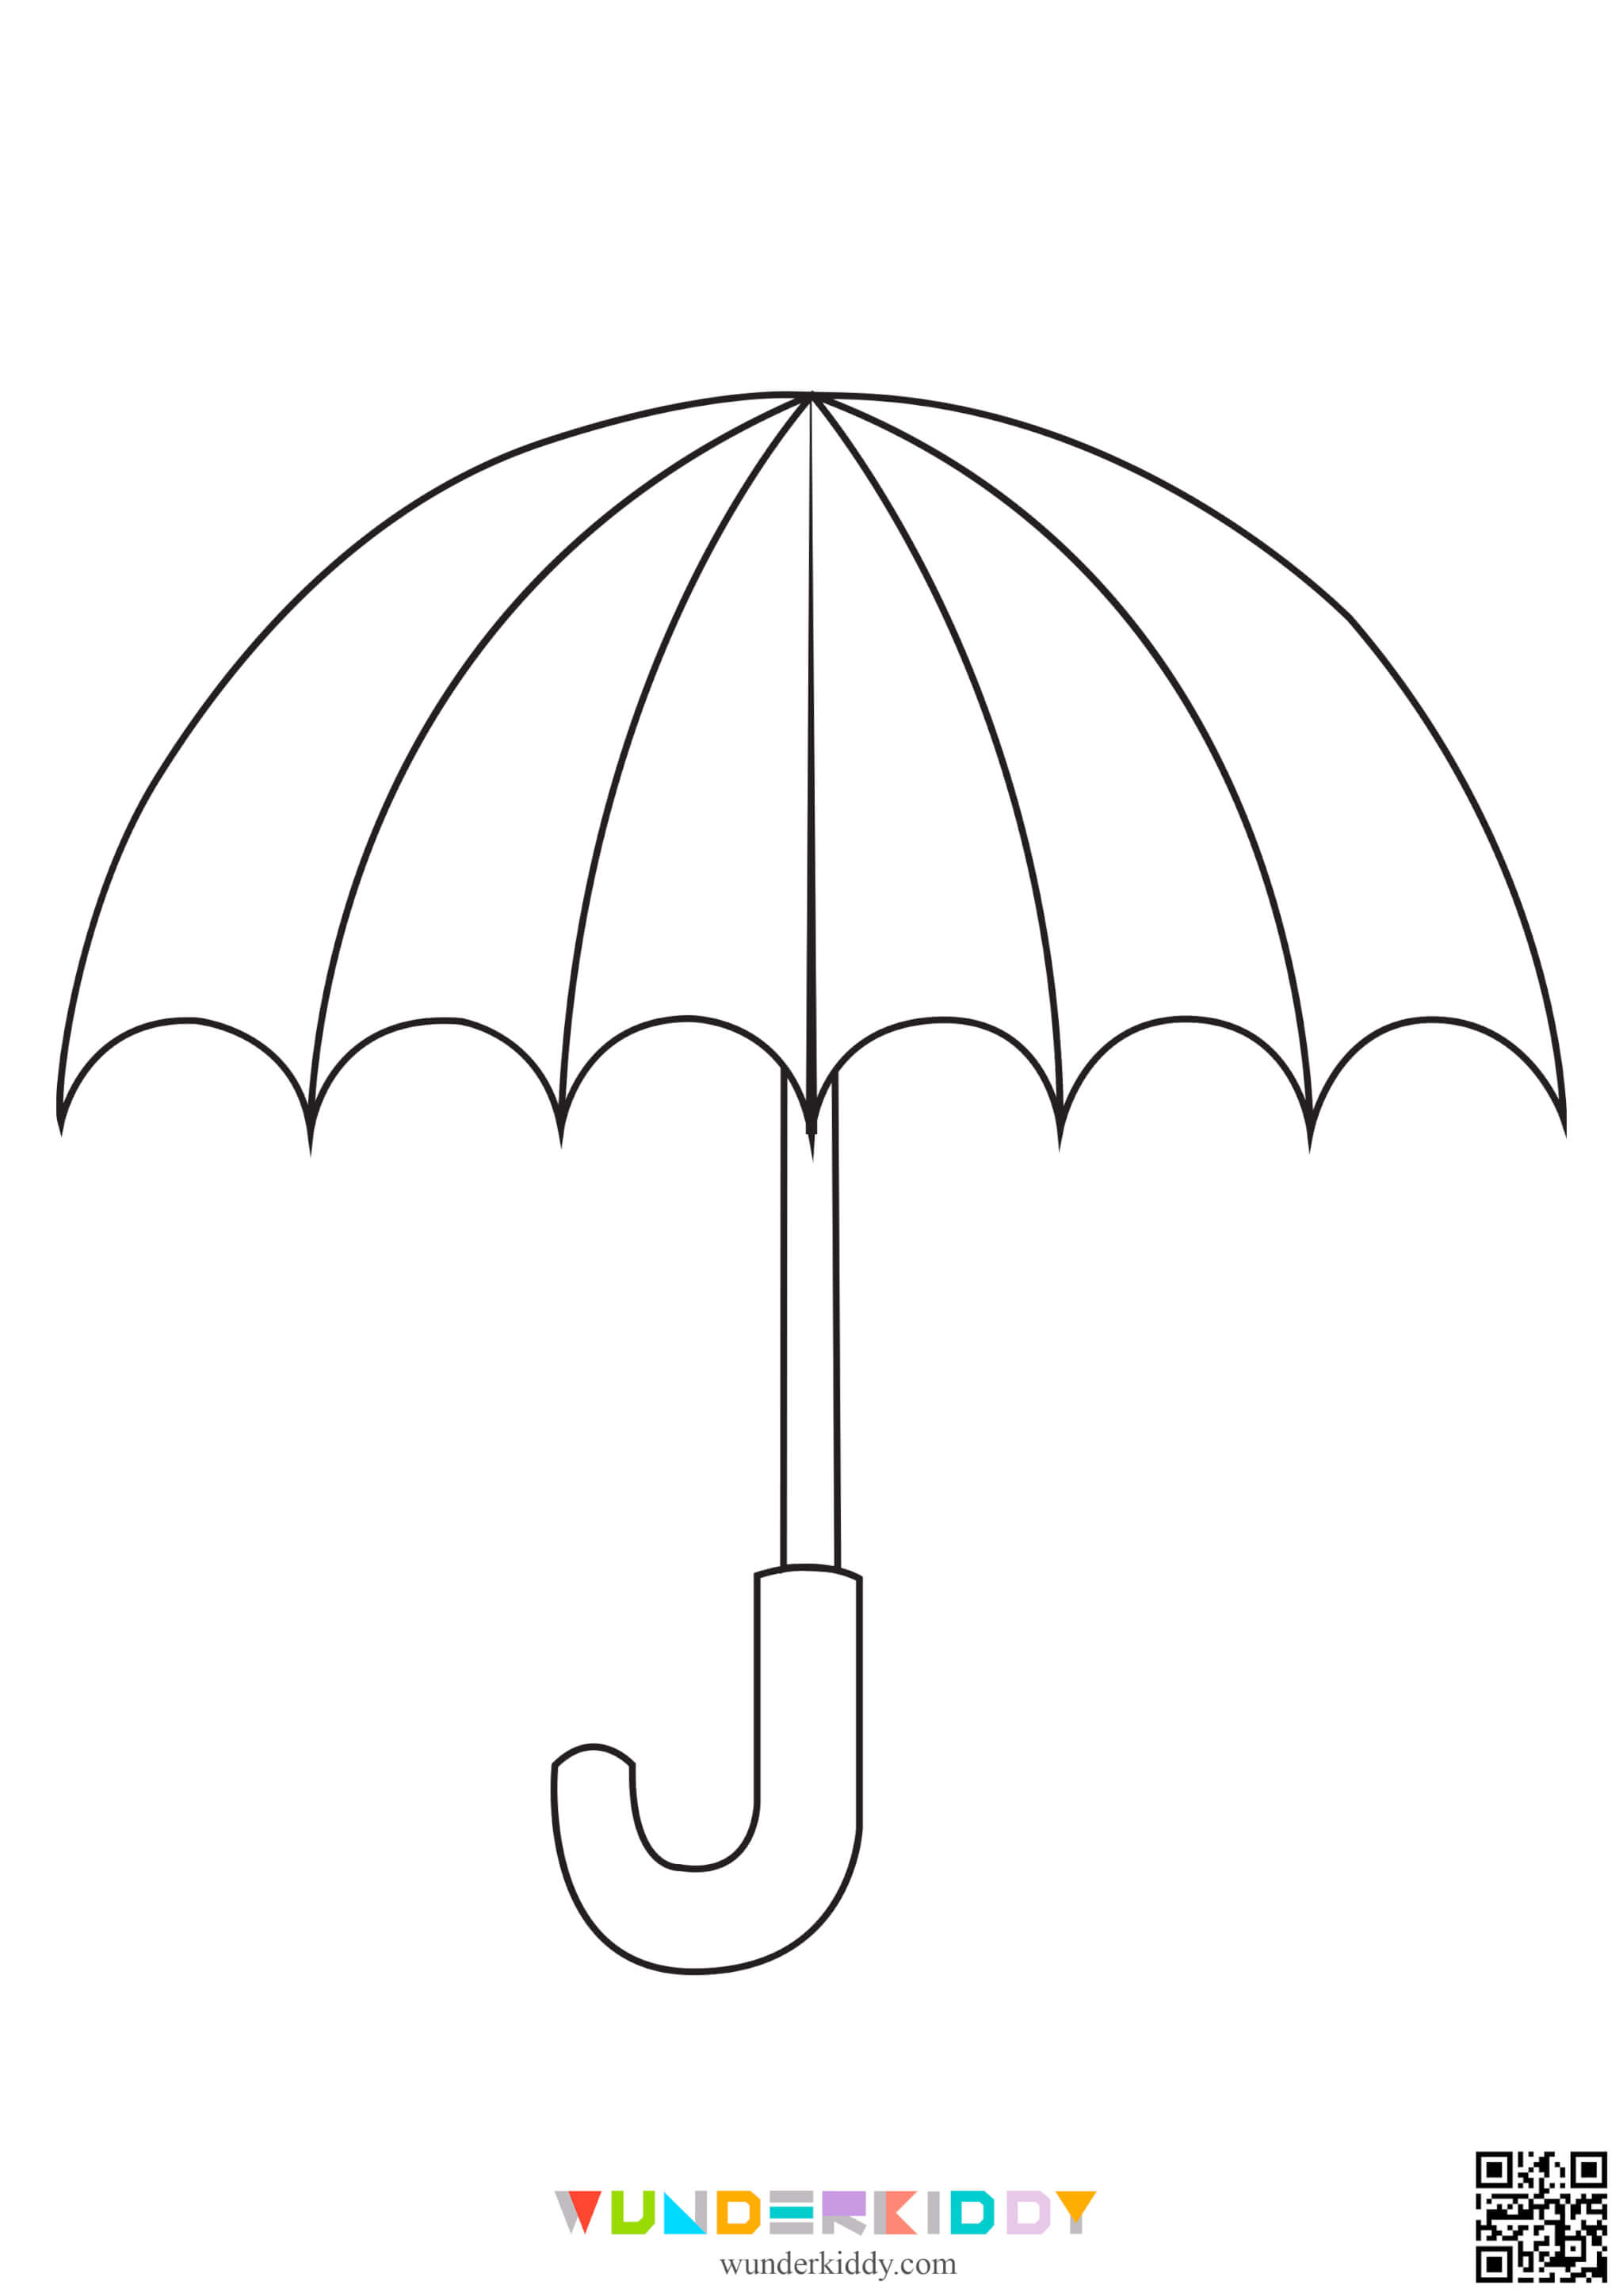 Umbrella Coloring Pages for Kids - Image 2